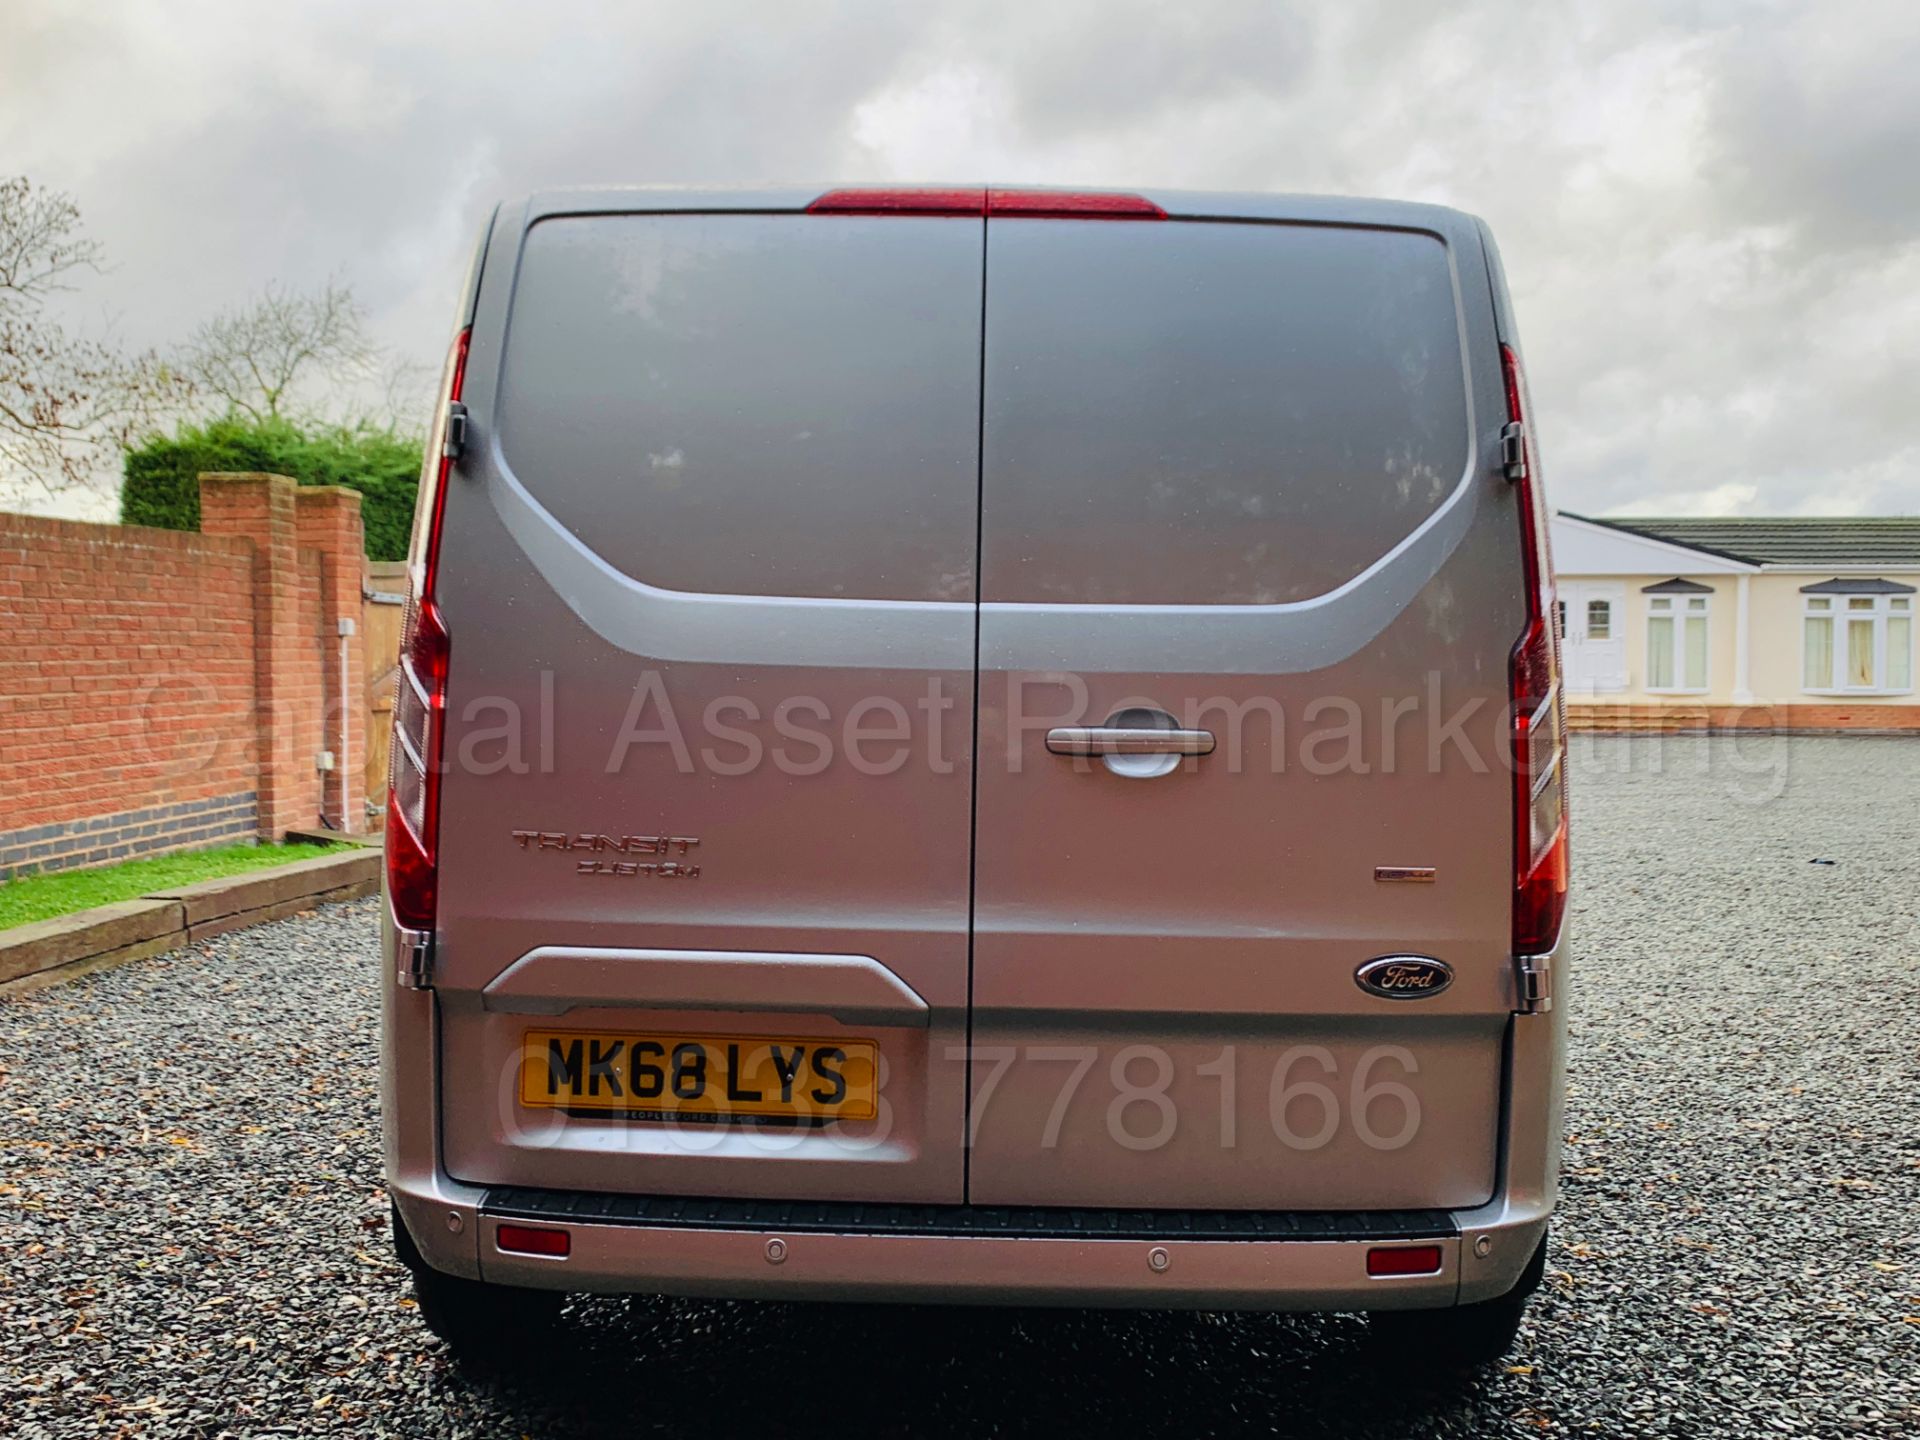 FORD TRANSIT CUSTOM *LIMITED EDTION* (2018 - 68 REG) '2.0 TDCI - 130 BHP - 6 SPEED' *ALL NEW MODEL* - Image 12 of 51